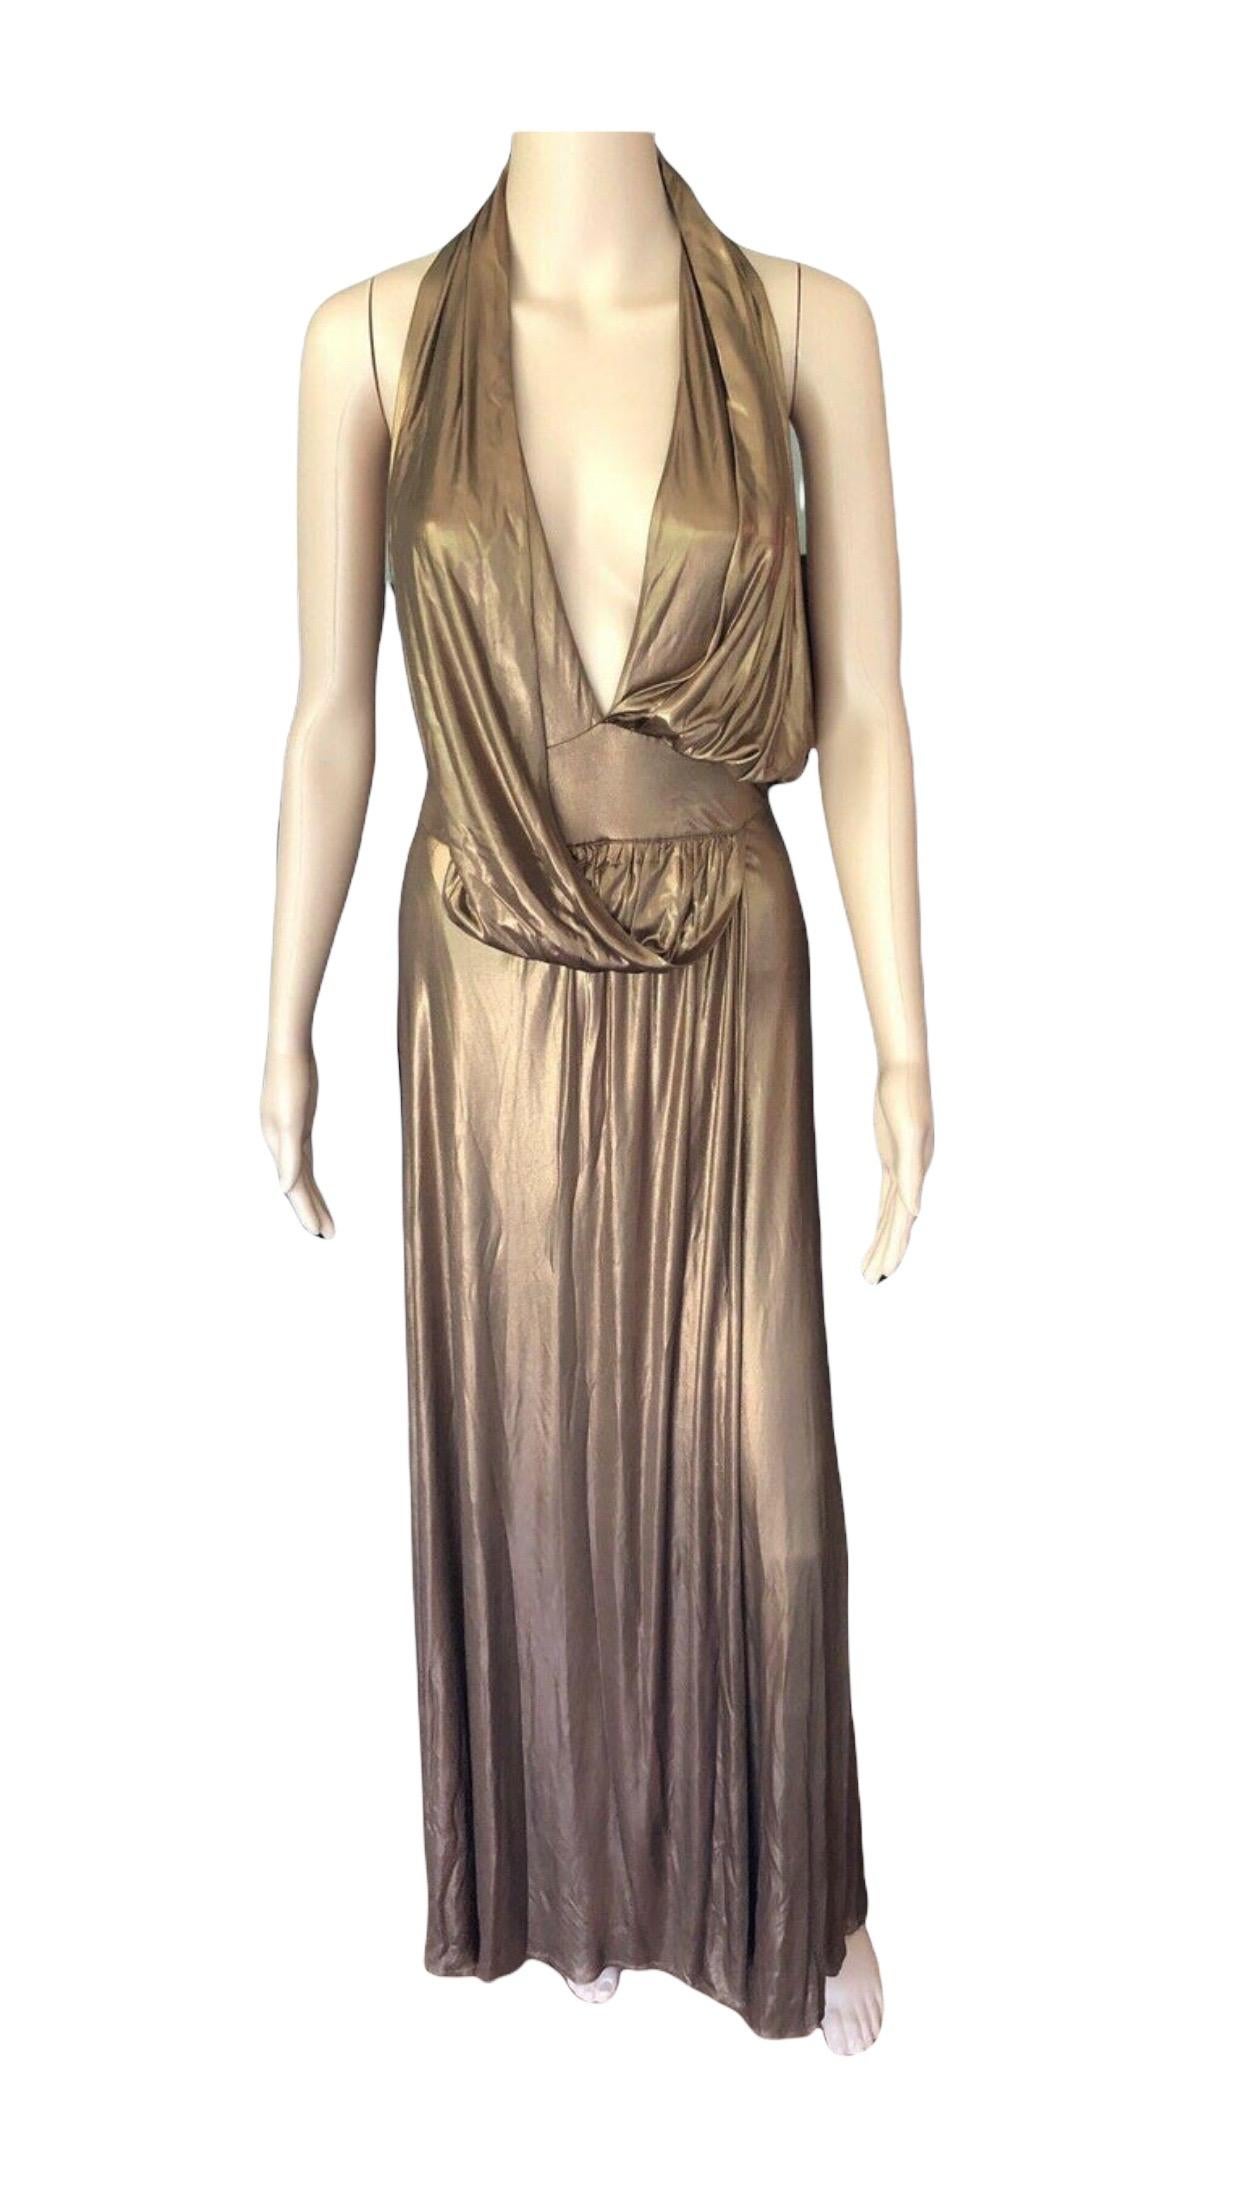 Gucci Runway F/W 2006 Plunging Neckline Backless Gold Metallic Dress Gown 2